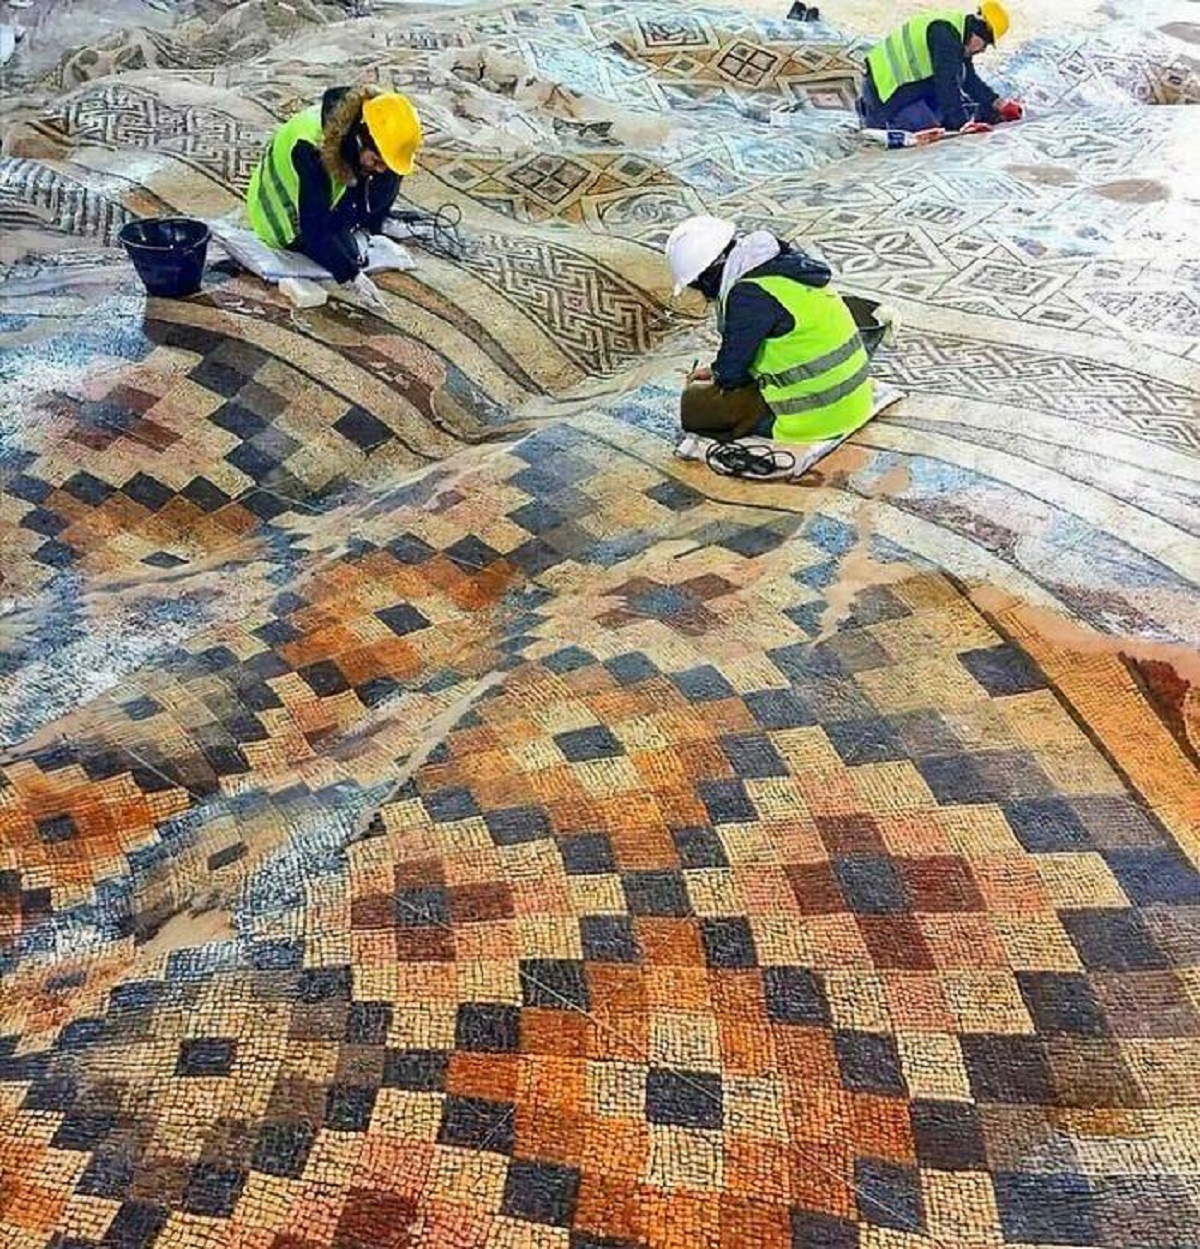 "One Of The Largest Roman Mosaic Floors Was Discovered During The Construction Of A Hotel In Antakya, Turkey. The Warping Effect Was Caused By The Earth Shifting Over Time And Earthquakes, Giving It The Impression Of A Giant Rippled Blanket"